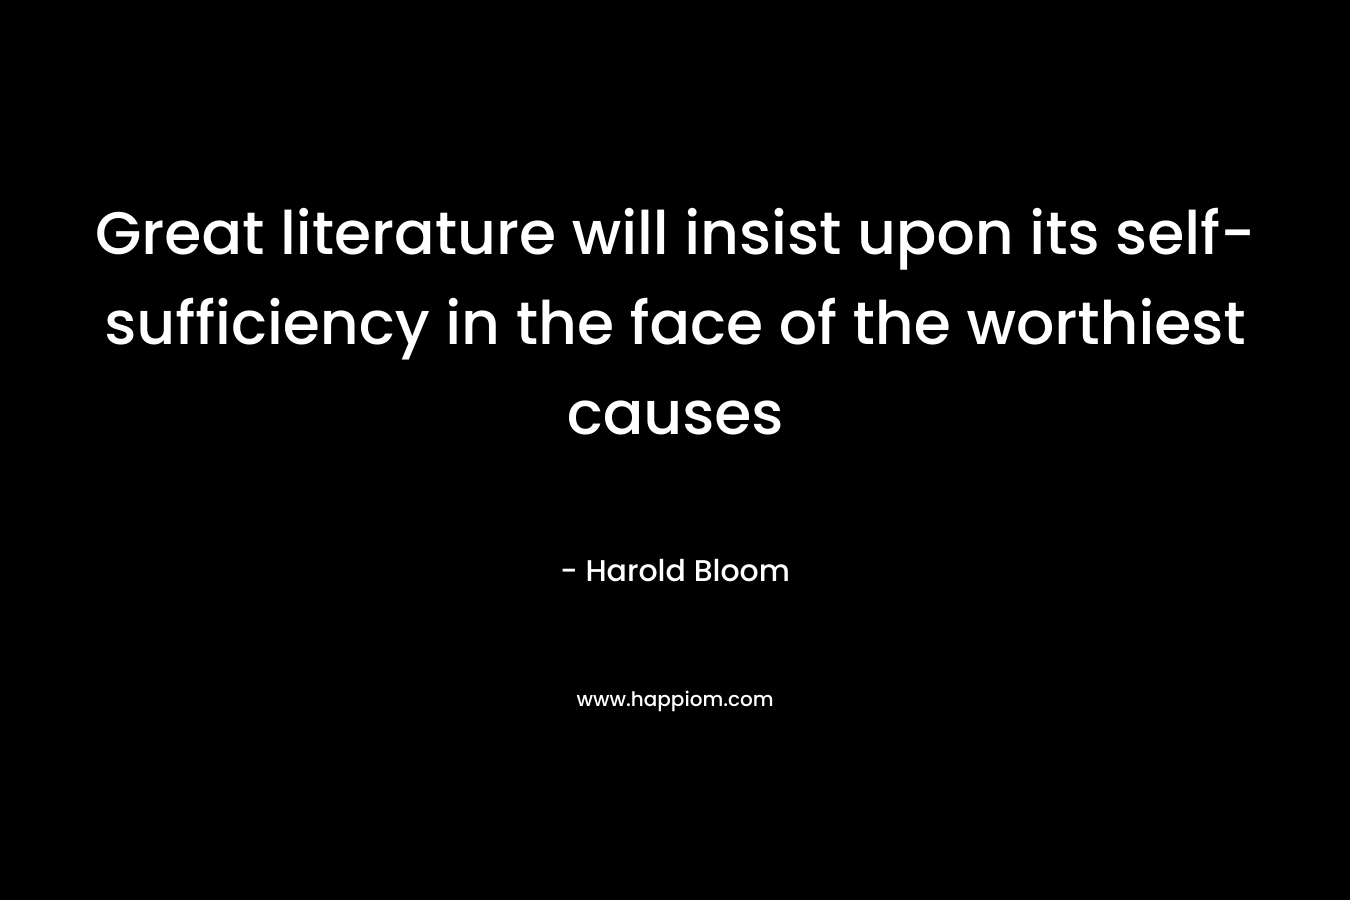 Great literature will insist upon its self-sufficiency in the face of the worthiest causes